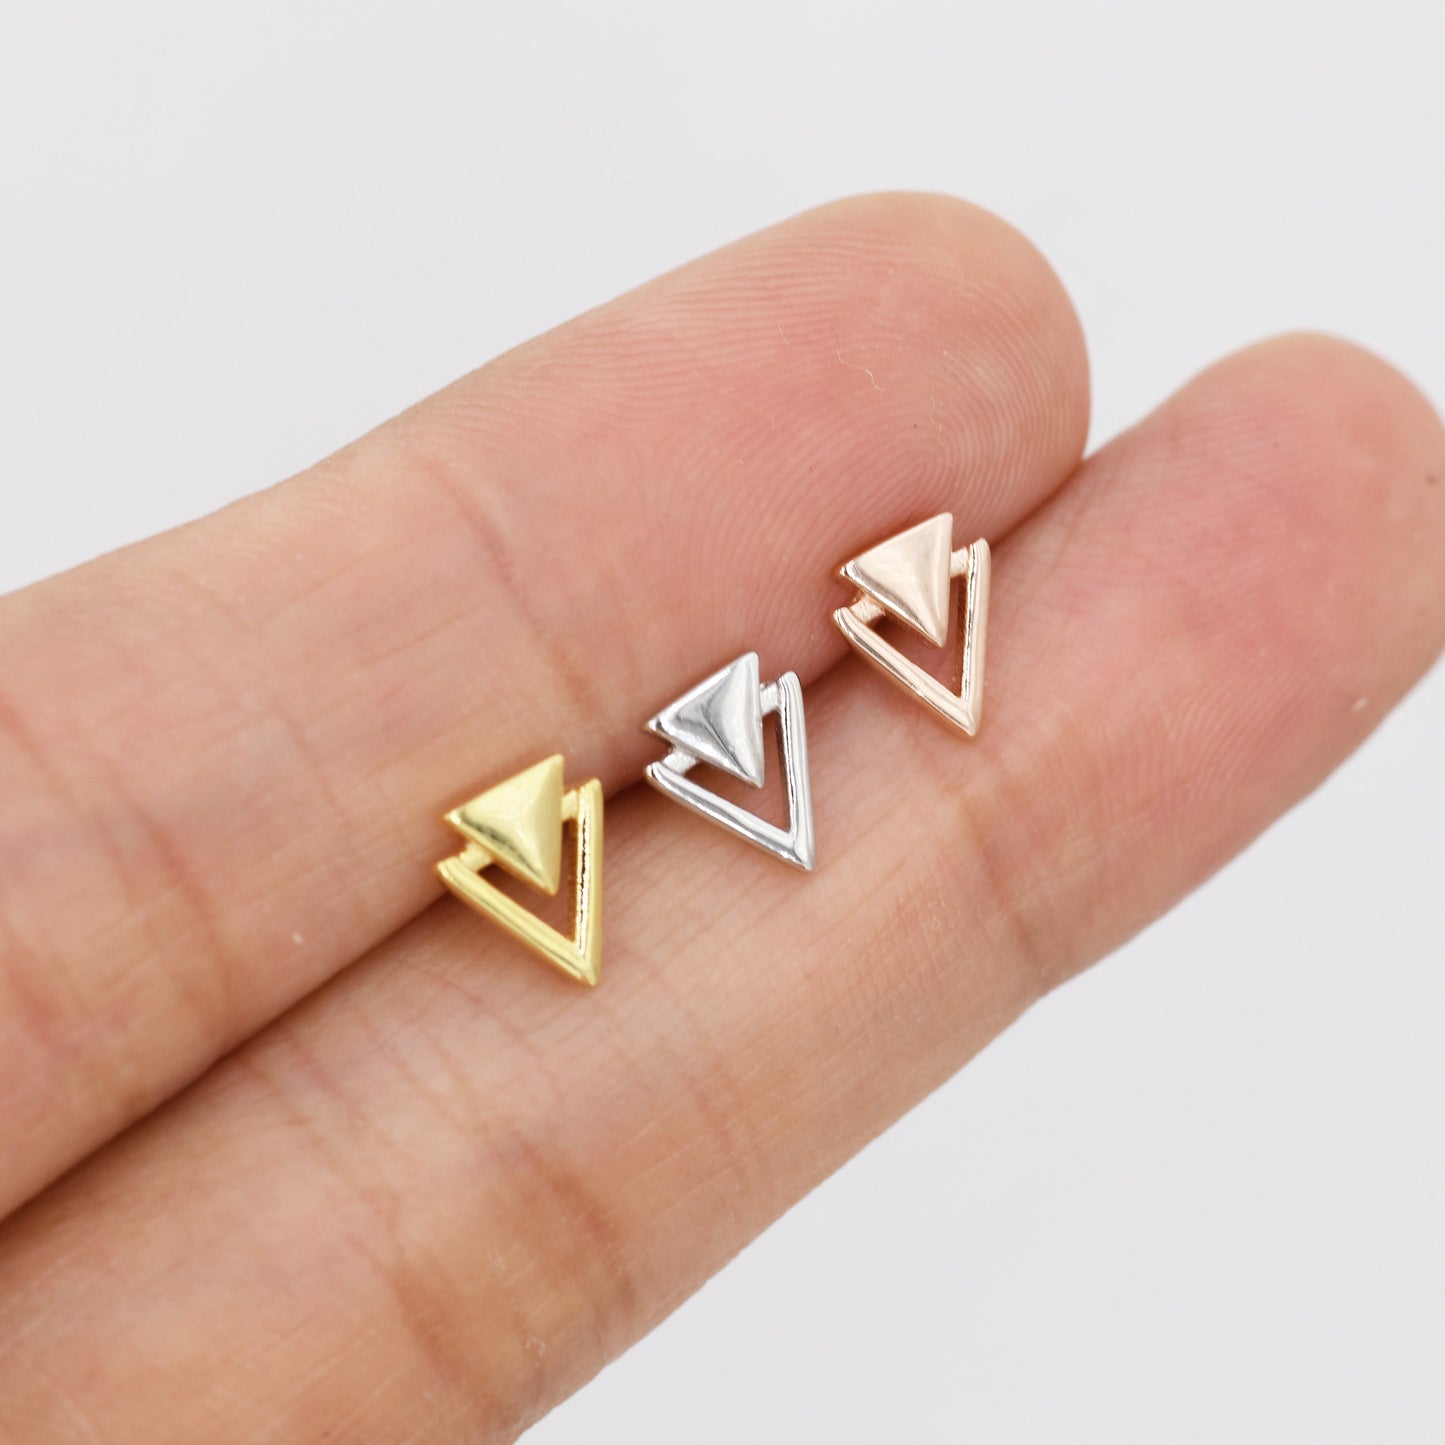 Sterling Silver Double Triangle Stud Earrings,  Silver, Gold or Rose Gold,  Small Earrings, Stacking Earrings,